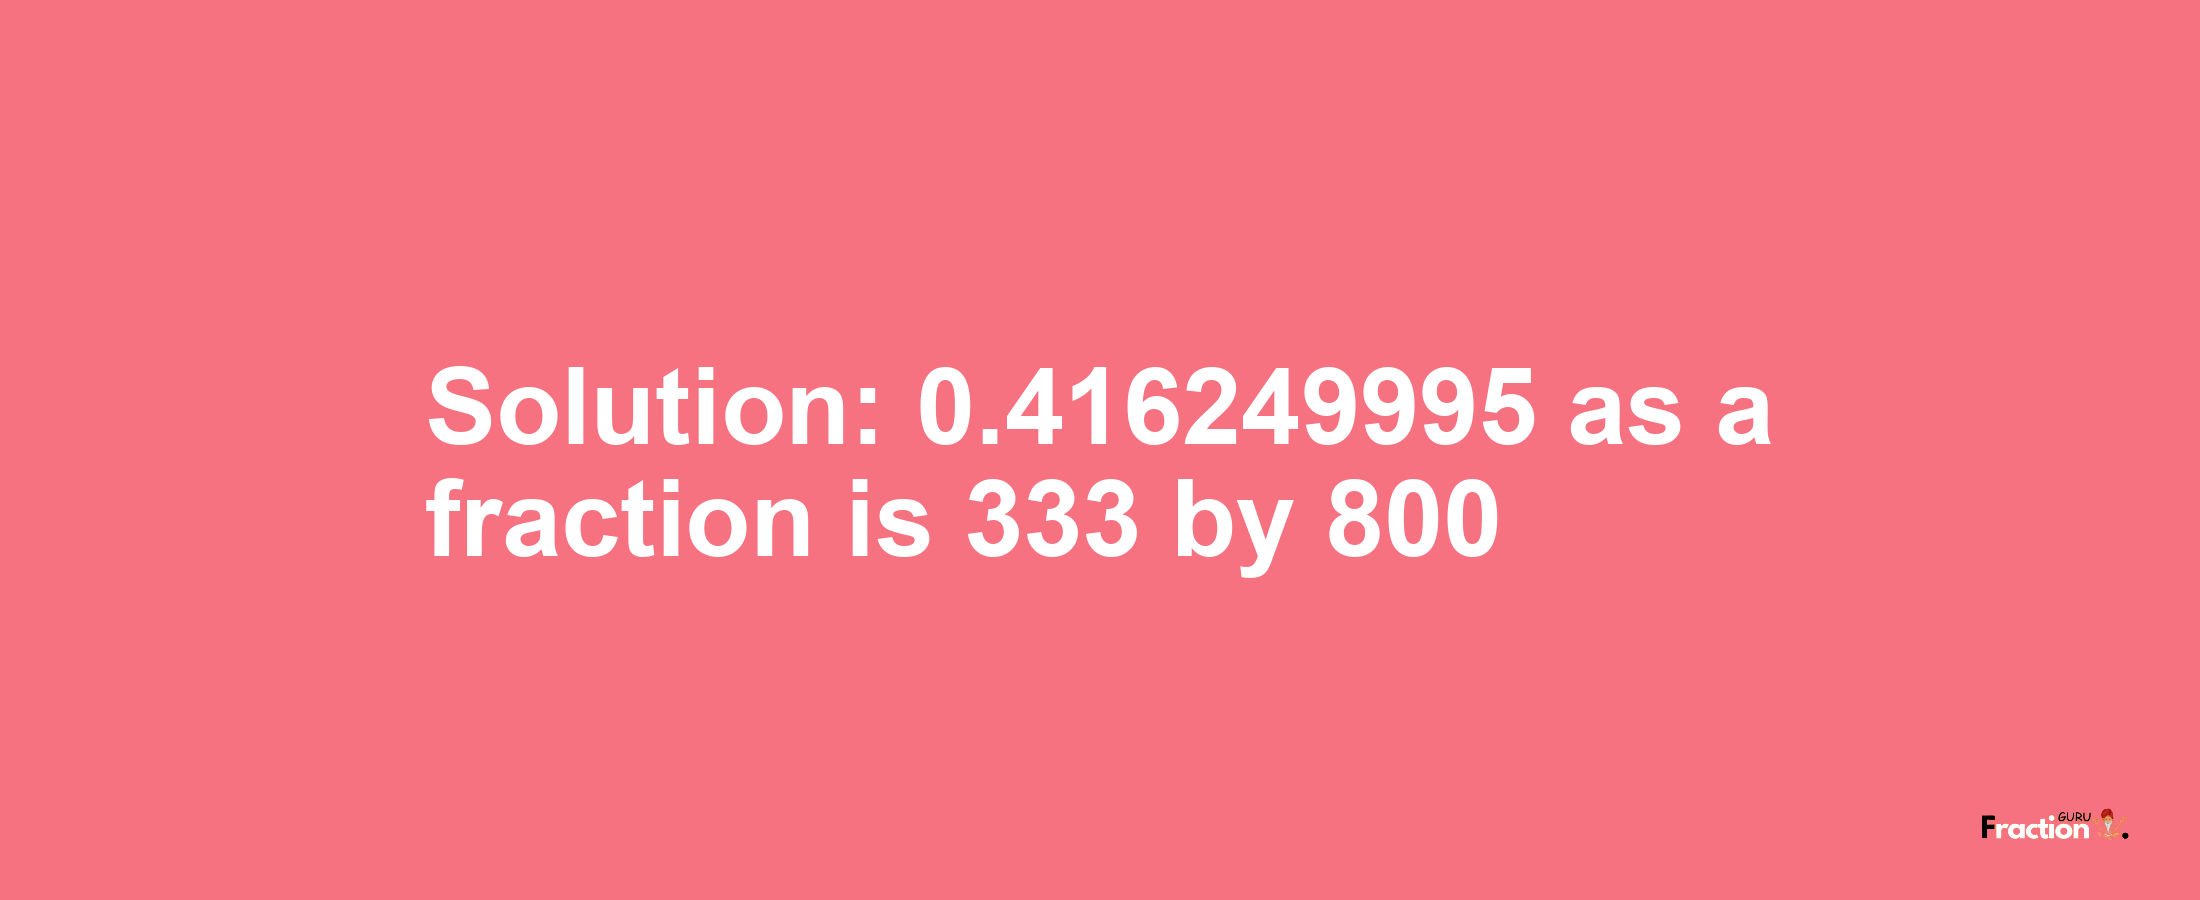 Solution:0.416249995 as a fraction is 333/800